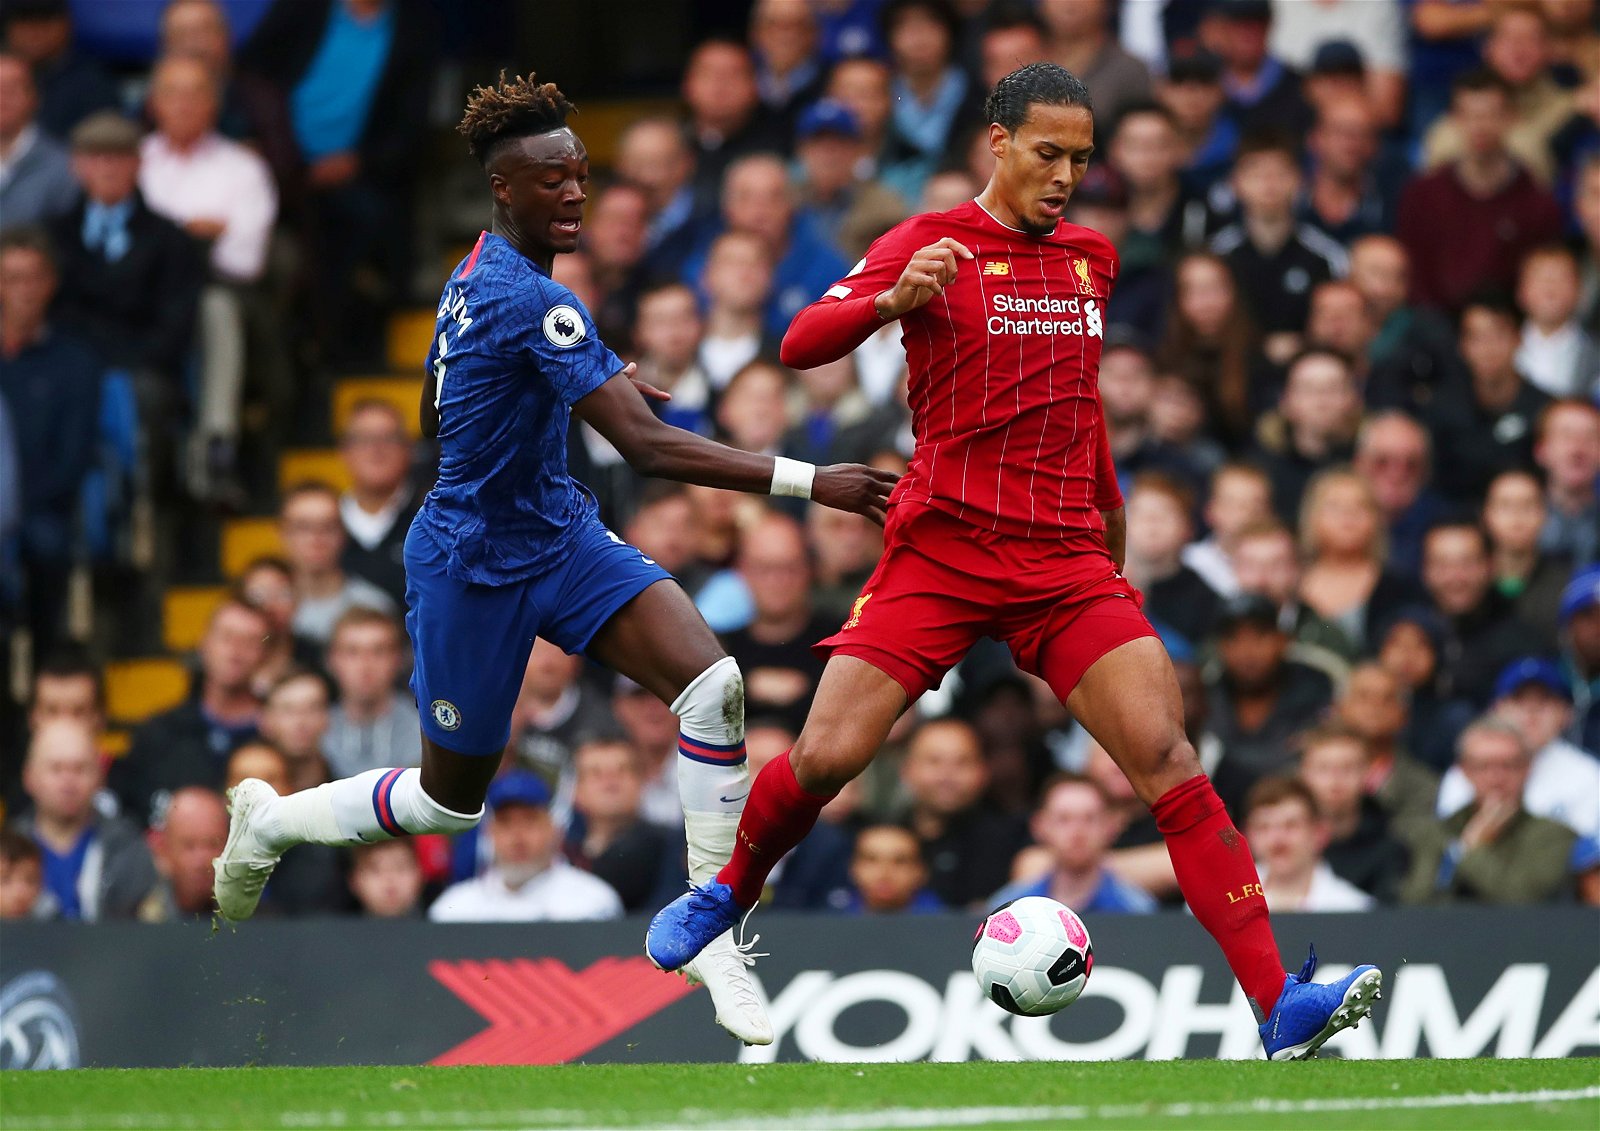 Who Chelsea striker Tammy Abraham named as toughest defender to face